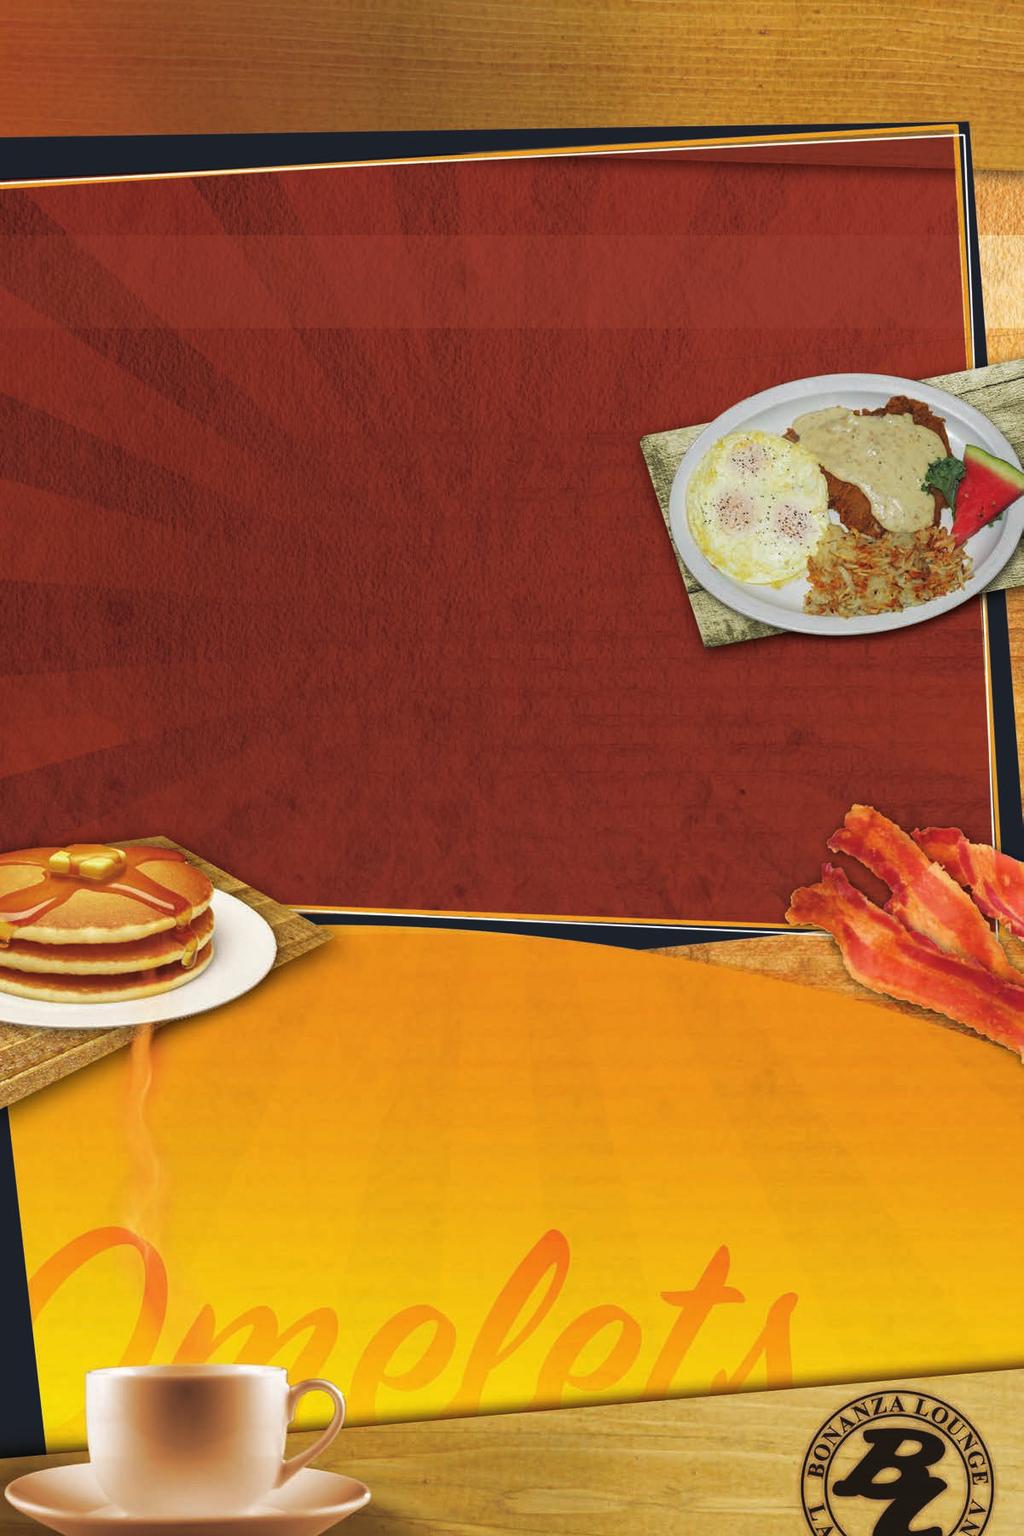 - BREAKFAST- Breakfast served from 7:00am - 11:30am Monday - Friday, 7:00am - 2pm Saturday and Sunday.